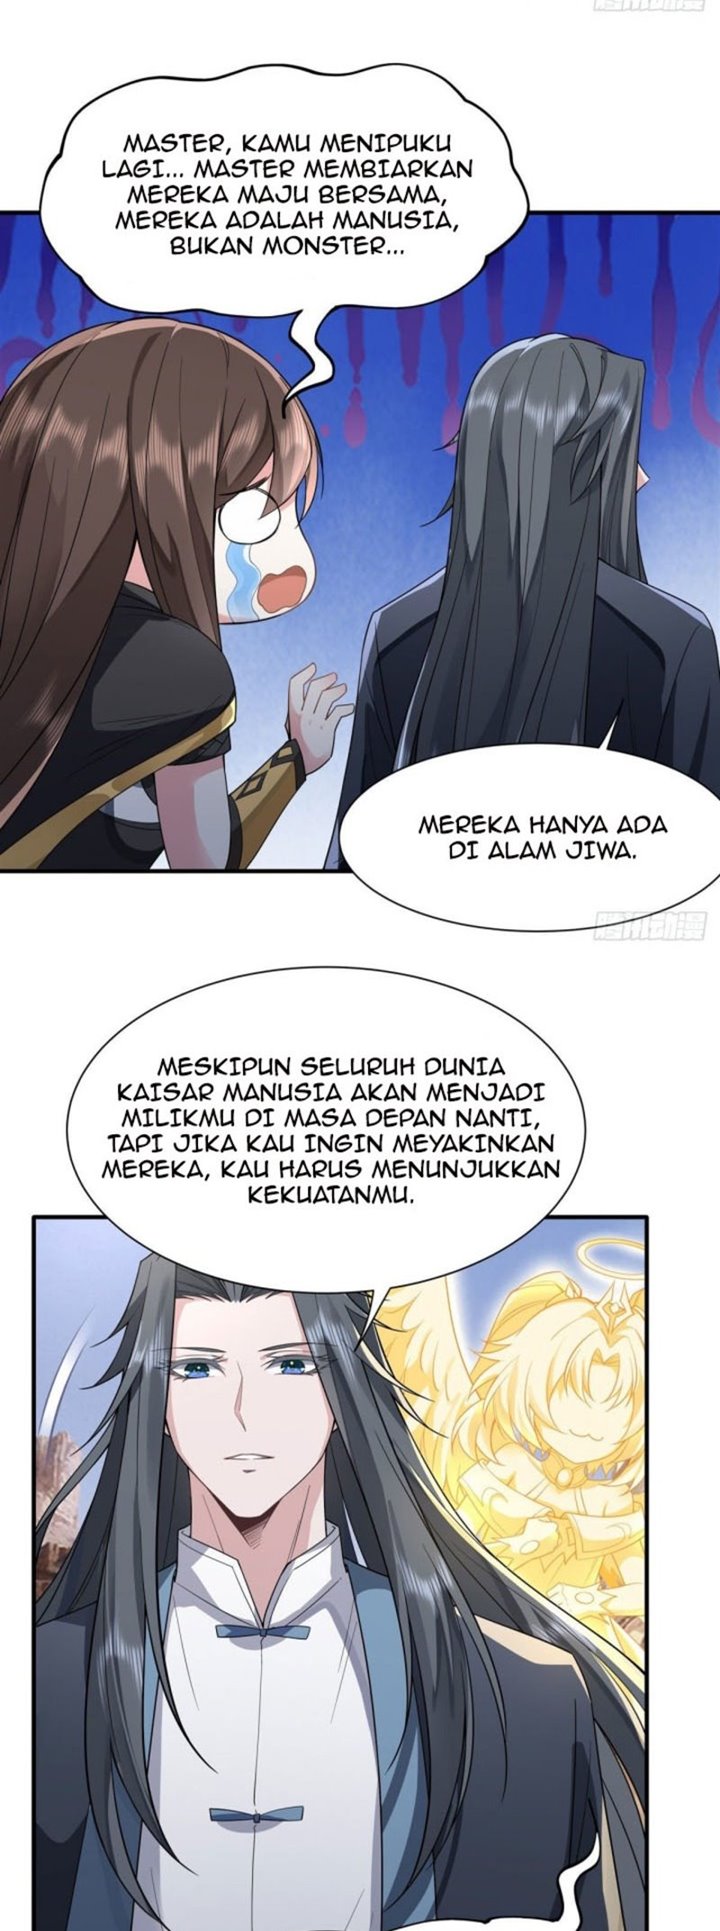 Dilarang COPAS - situs resmi www.mangacanblog.com - Komik my female apprentices are all big shots from the future 015 - chapter 15 16 Indonesia my female apprentices are all big shots from the future 015 - chapter 15 Terbaru 23|Baca Manga Komik Indonesia|Mangacan